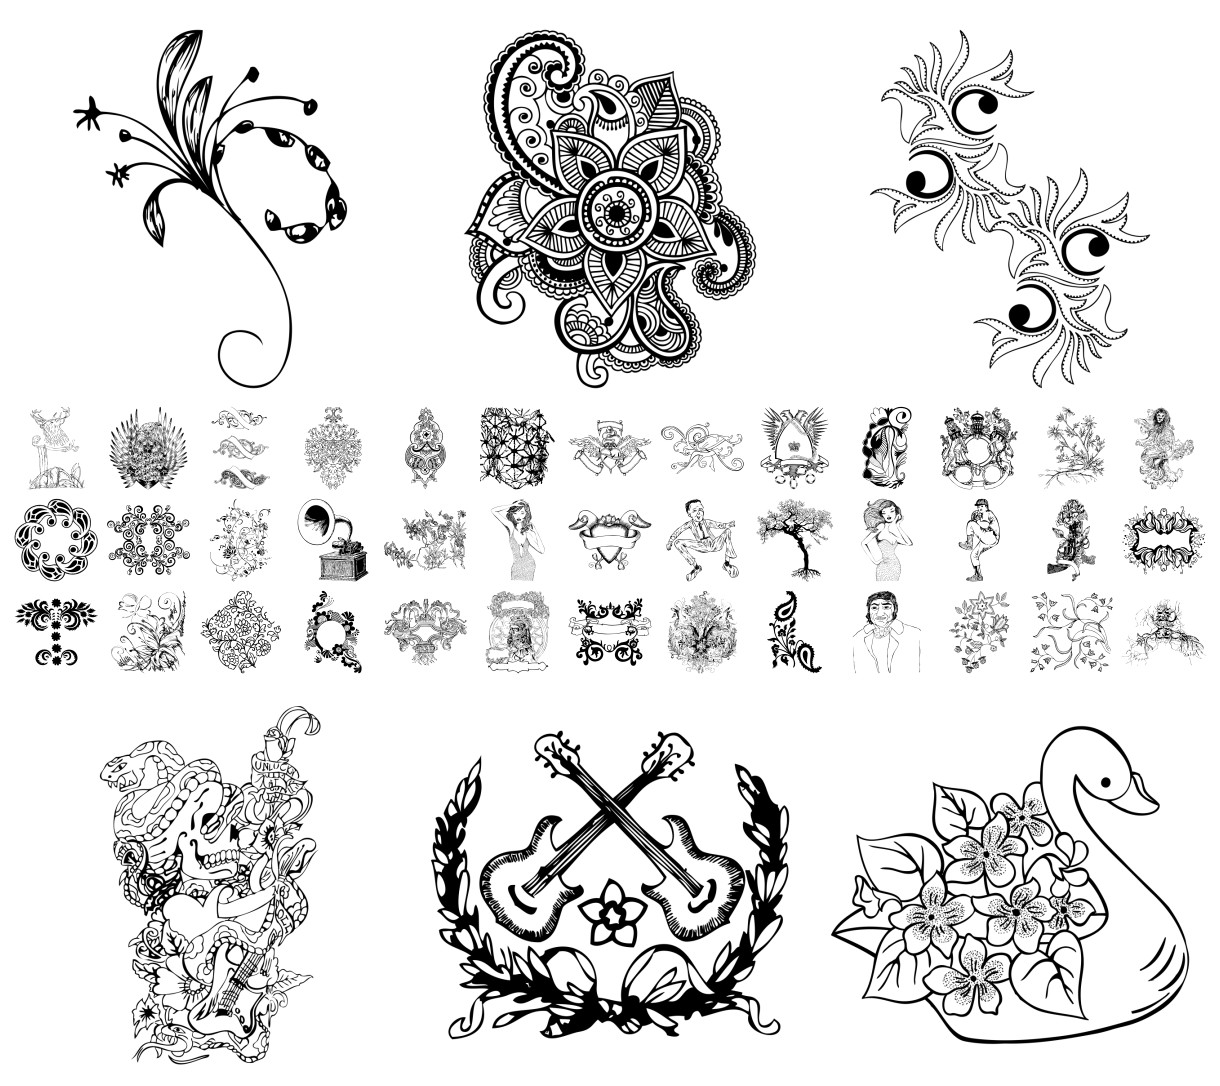 Dive into Creativity with Hand Drawn Vector Collection